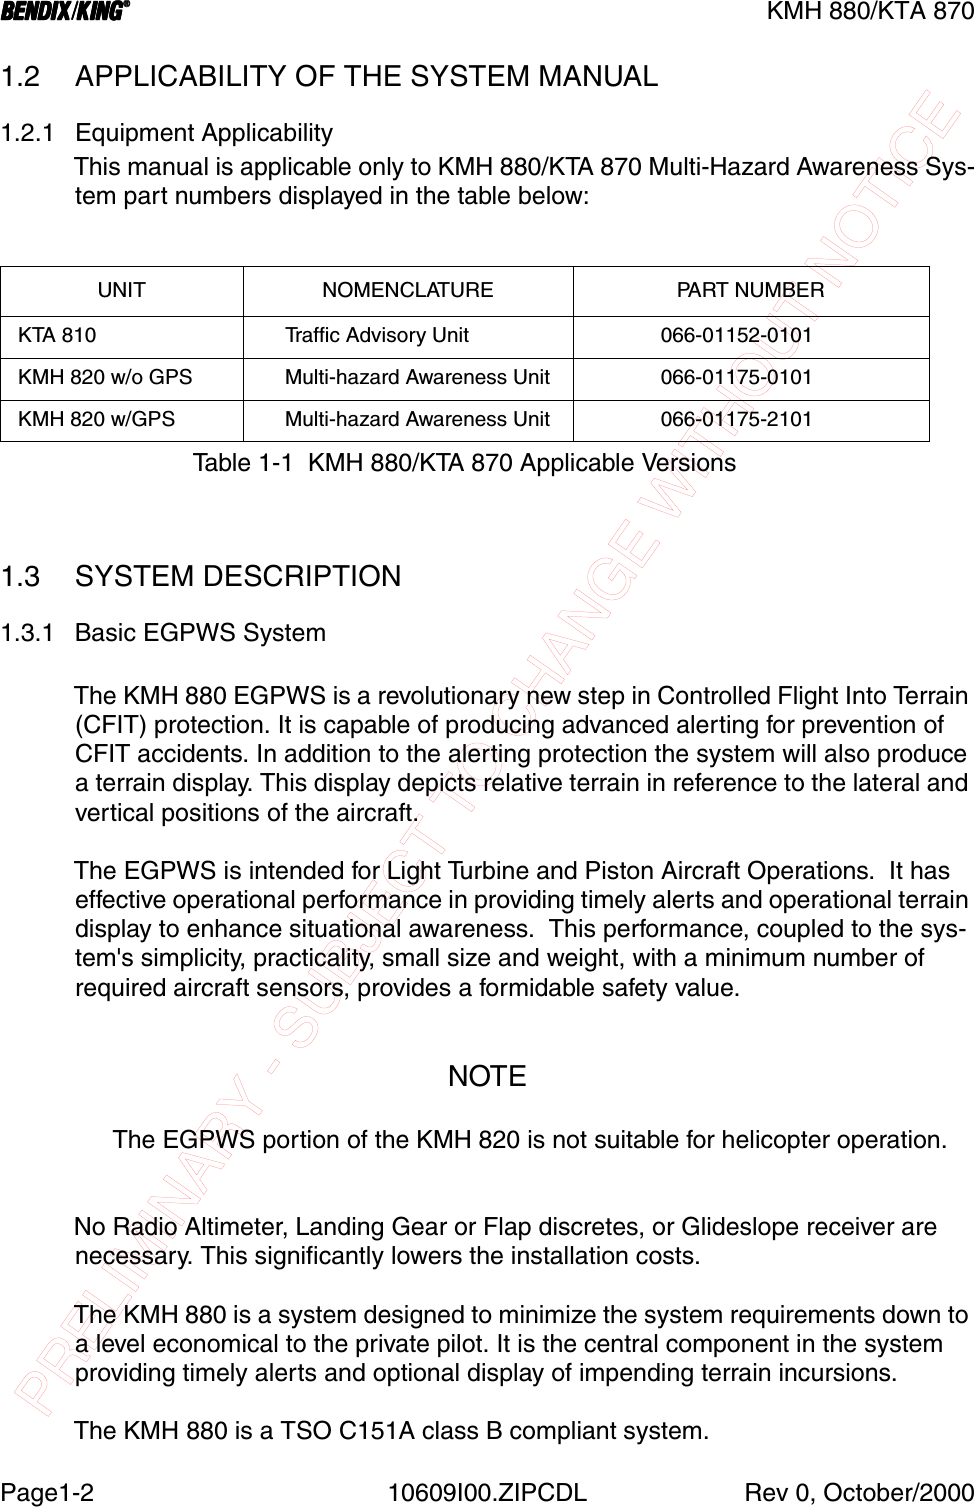 PRELIMINARY - SUBJECT TO CHANGE WITHOUT NOTICEBBBBKMH 880/KTA 870Page1-2 10609I00.ZIPCDL Rev 0, October/20001.2 APPLICABILITY OF THE SYSTEM MANUAL1.2.1 Equipment ApplicabilityThis manual is applicable only to KMH 880/KTA 870 Multi-Hazard Awareness Sys-tem part numbers displayed in the table below:1.3 SYSTEM DESCRIPTION1.3.1 Basic EGPWS SystemThe KMH 880 EGPWS is a revolutionary new step in Controlled Flight Into Terrain (CFIT) protection. It is capable of producing advanced alerting for prevention of CFIT accidents. In addition to the alerting protection the system will also produce a terrain display. This display depicts relative terrain in reference to the lateral and vertical positions of the aircraft.The EGPWS is intended for Light Turbine and Piston Aircraft Operations.  It has effective operational performance in providing timely alerts and operational terrain display to enhance situational awareness.  This performance, coupled to the sys-tem&apos;s simplicity, practicality, small size and weight, with a minimum number of required aircraft sensors, provides a formidable safety value.NOTEThe EGPWS portion of the KMH 820 is not suitable for helicopter operation.No Radio Altimeter, Landing Gear or Flap discretes, or Glideslope receiver are necessary. This significantly lowers the installation costs.The KMH 880 is a system designed to minimize the system requirements down to a level economical to the private pilot. It is the central component in the system providing timely alerts and optional display of impending terrain incursions.The KMH 880 is a TSO C151A class B compliant system.UNIT NOMENCLATURE PART NUMBER KTA 810      Traffic Advisory Unit              066-01152-0101 KMH 820 w/o GPS      Multi-hazard Awareness Unit              066-01175-0101 KMH 820 w/GPS      Multi-hazard Awareness Unit              066-01175-2101Table 1-1  KMH 880/KTA 870 Applicable Versions